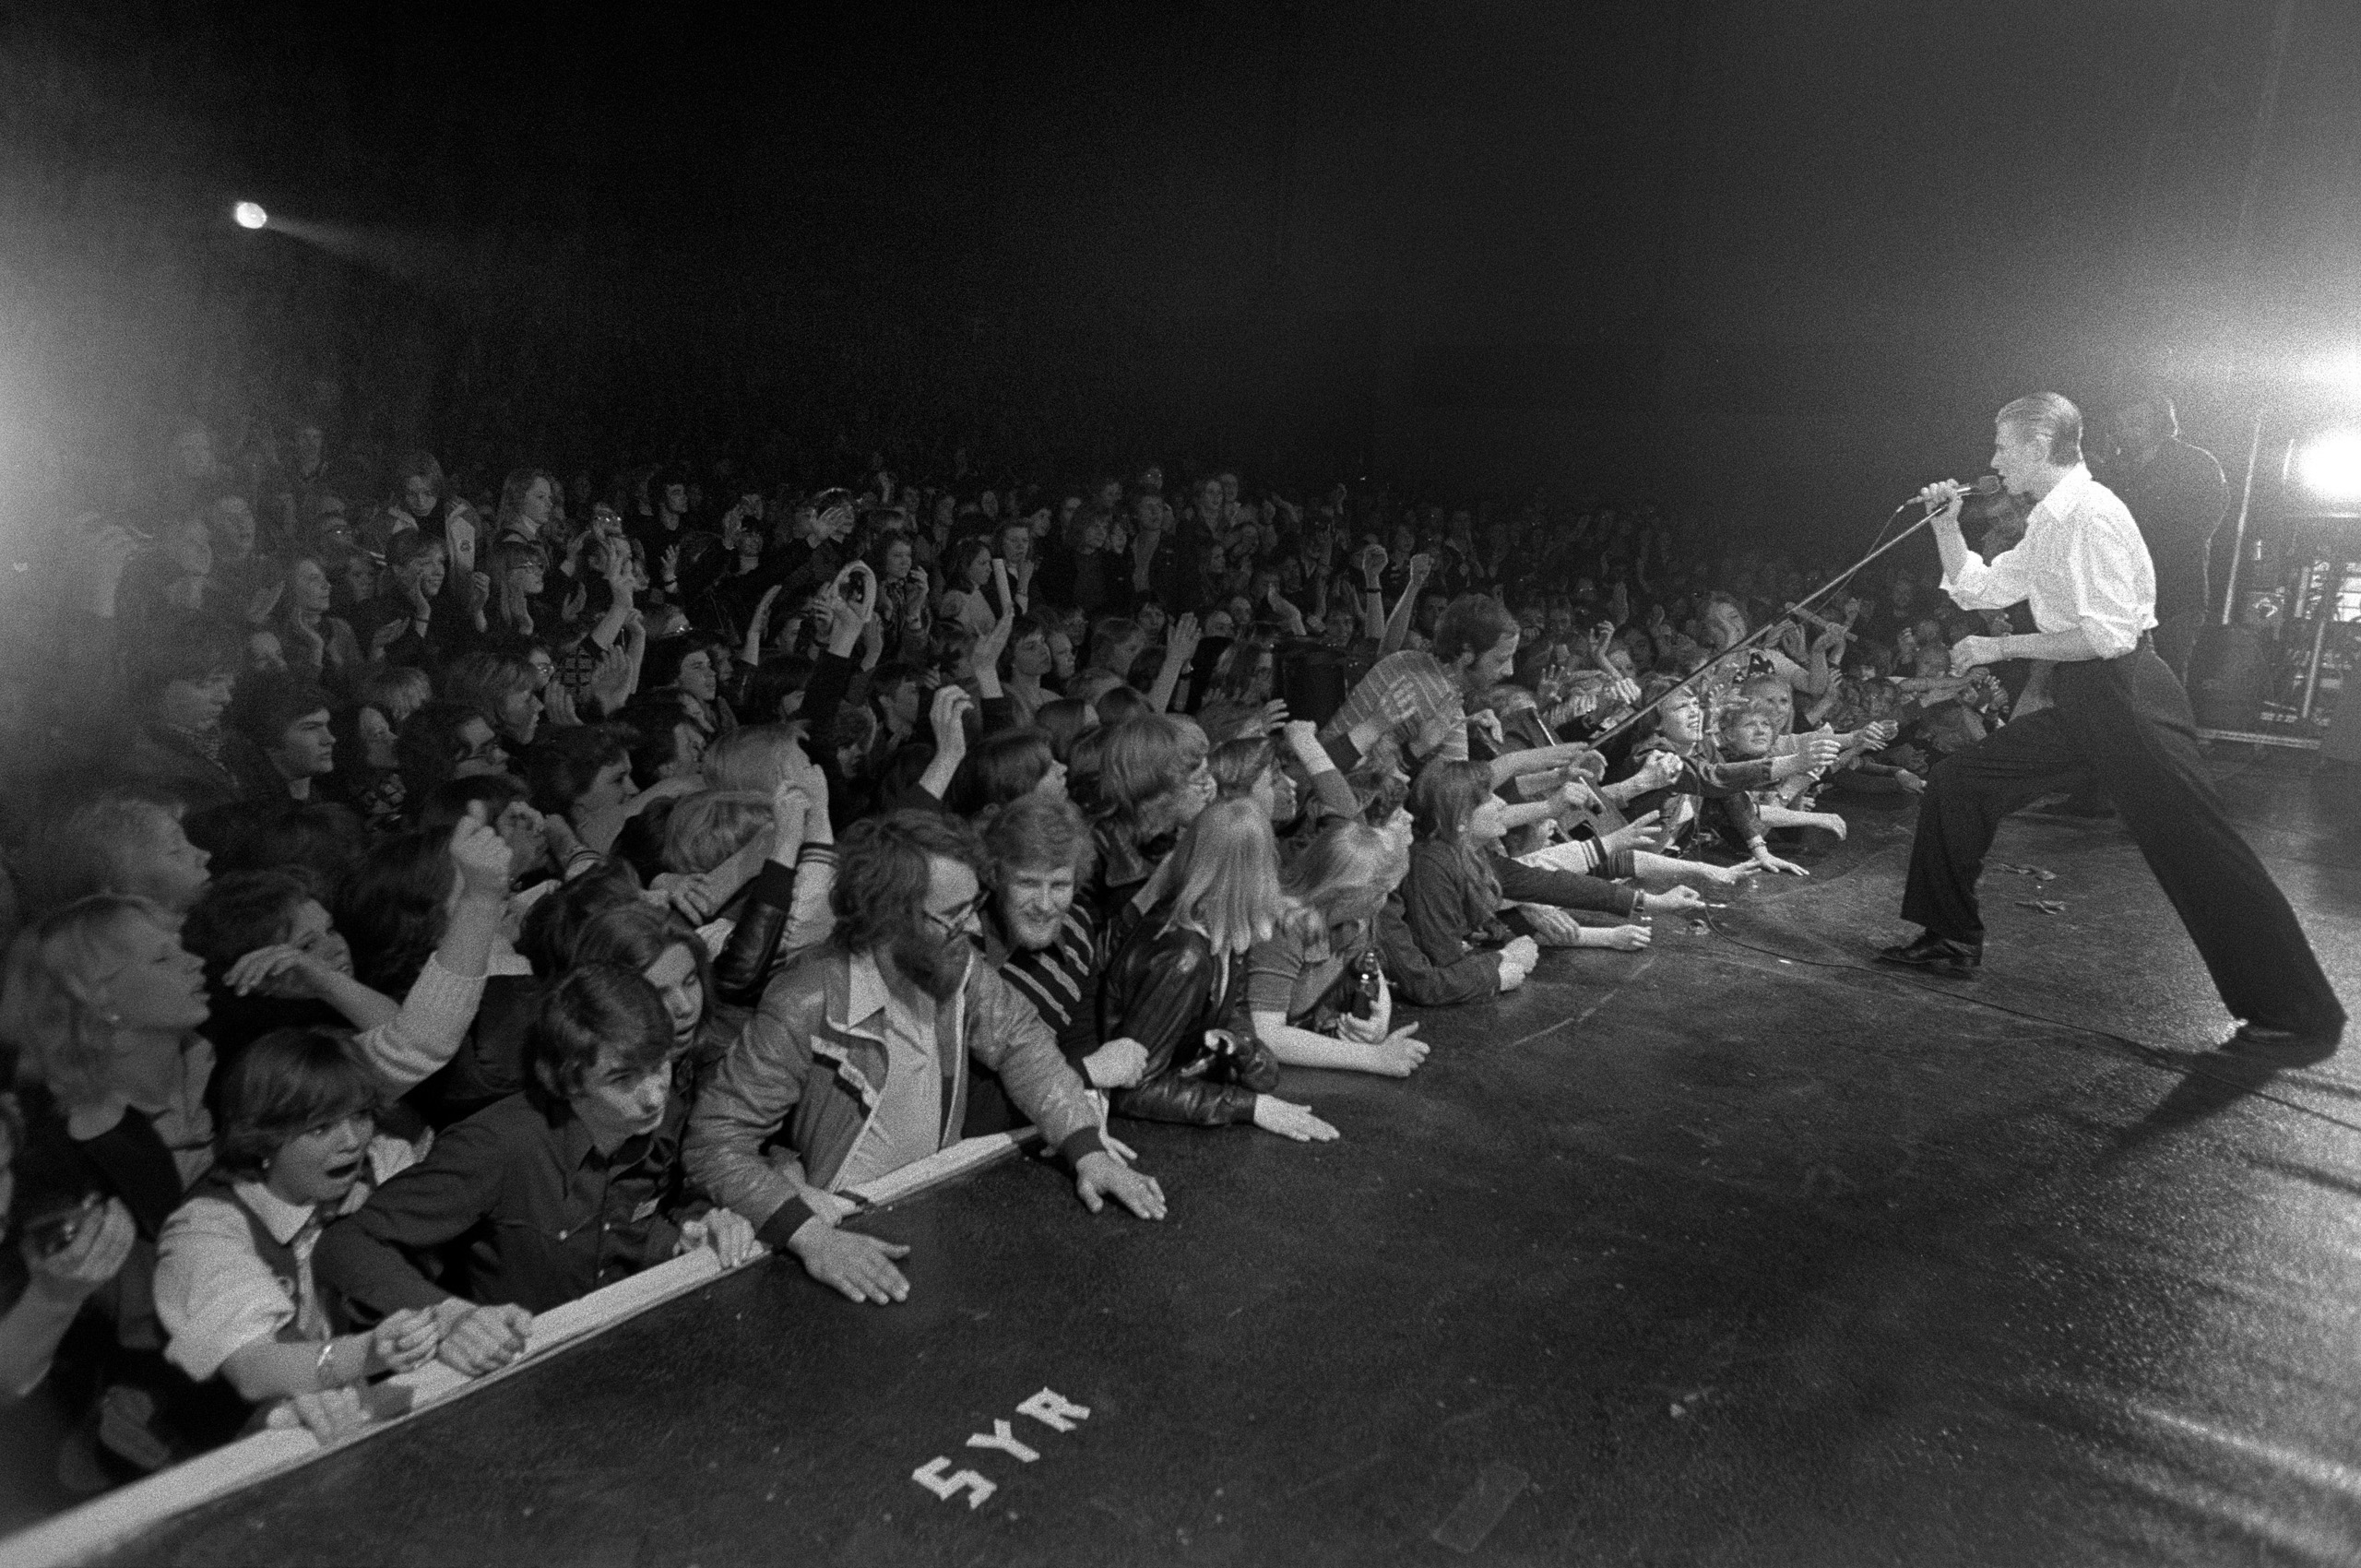 Bowie on stage during the Isolar tour, 1976.